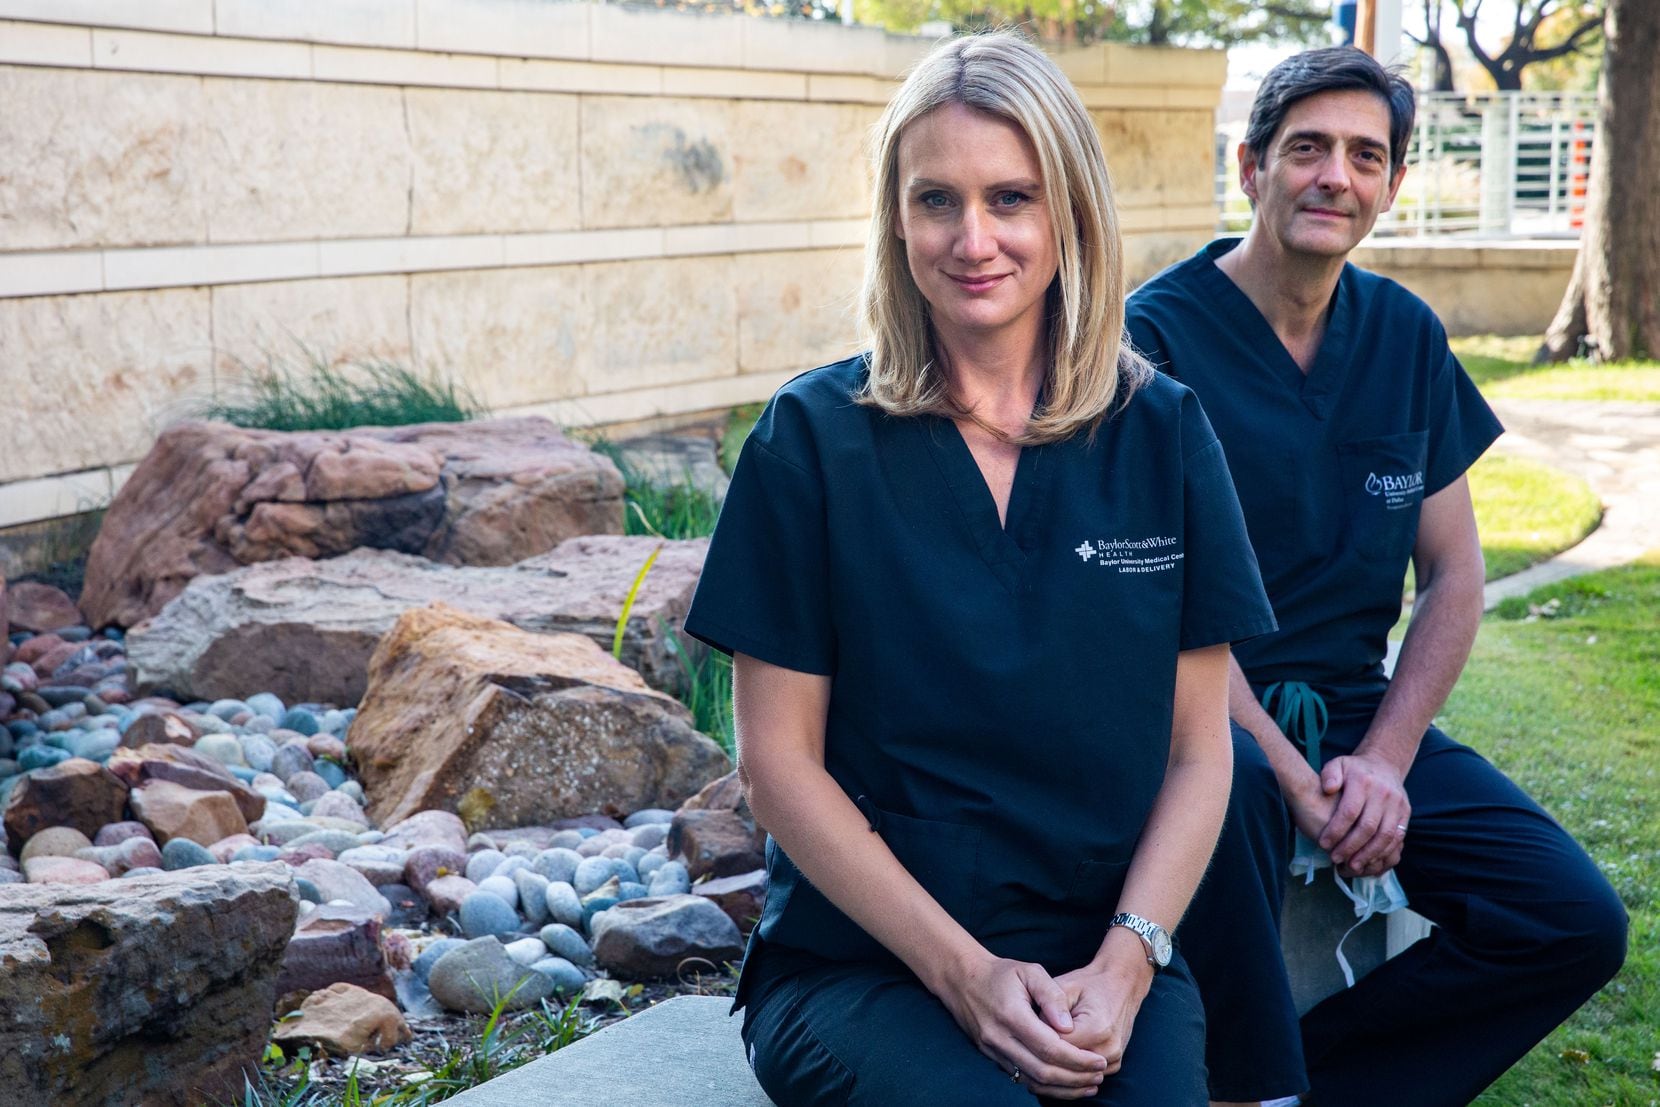 OB-GYN Dr. Liza Johannesson and transplant surgeon Dr. Giuliano Testa have grown Baylor University Medical Center's uterus transplant program into one of the largest and most successful in the world.